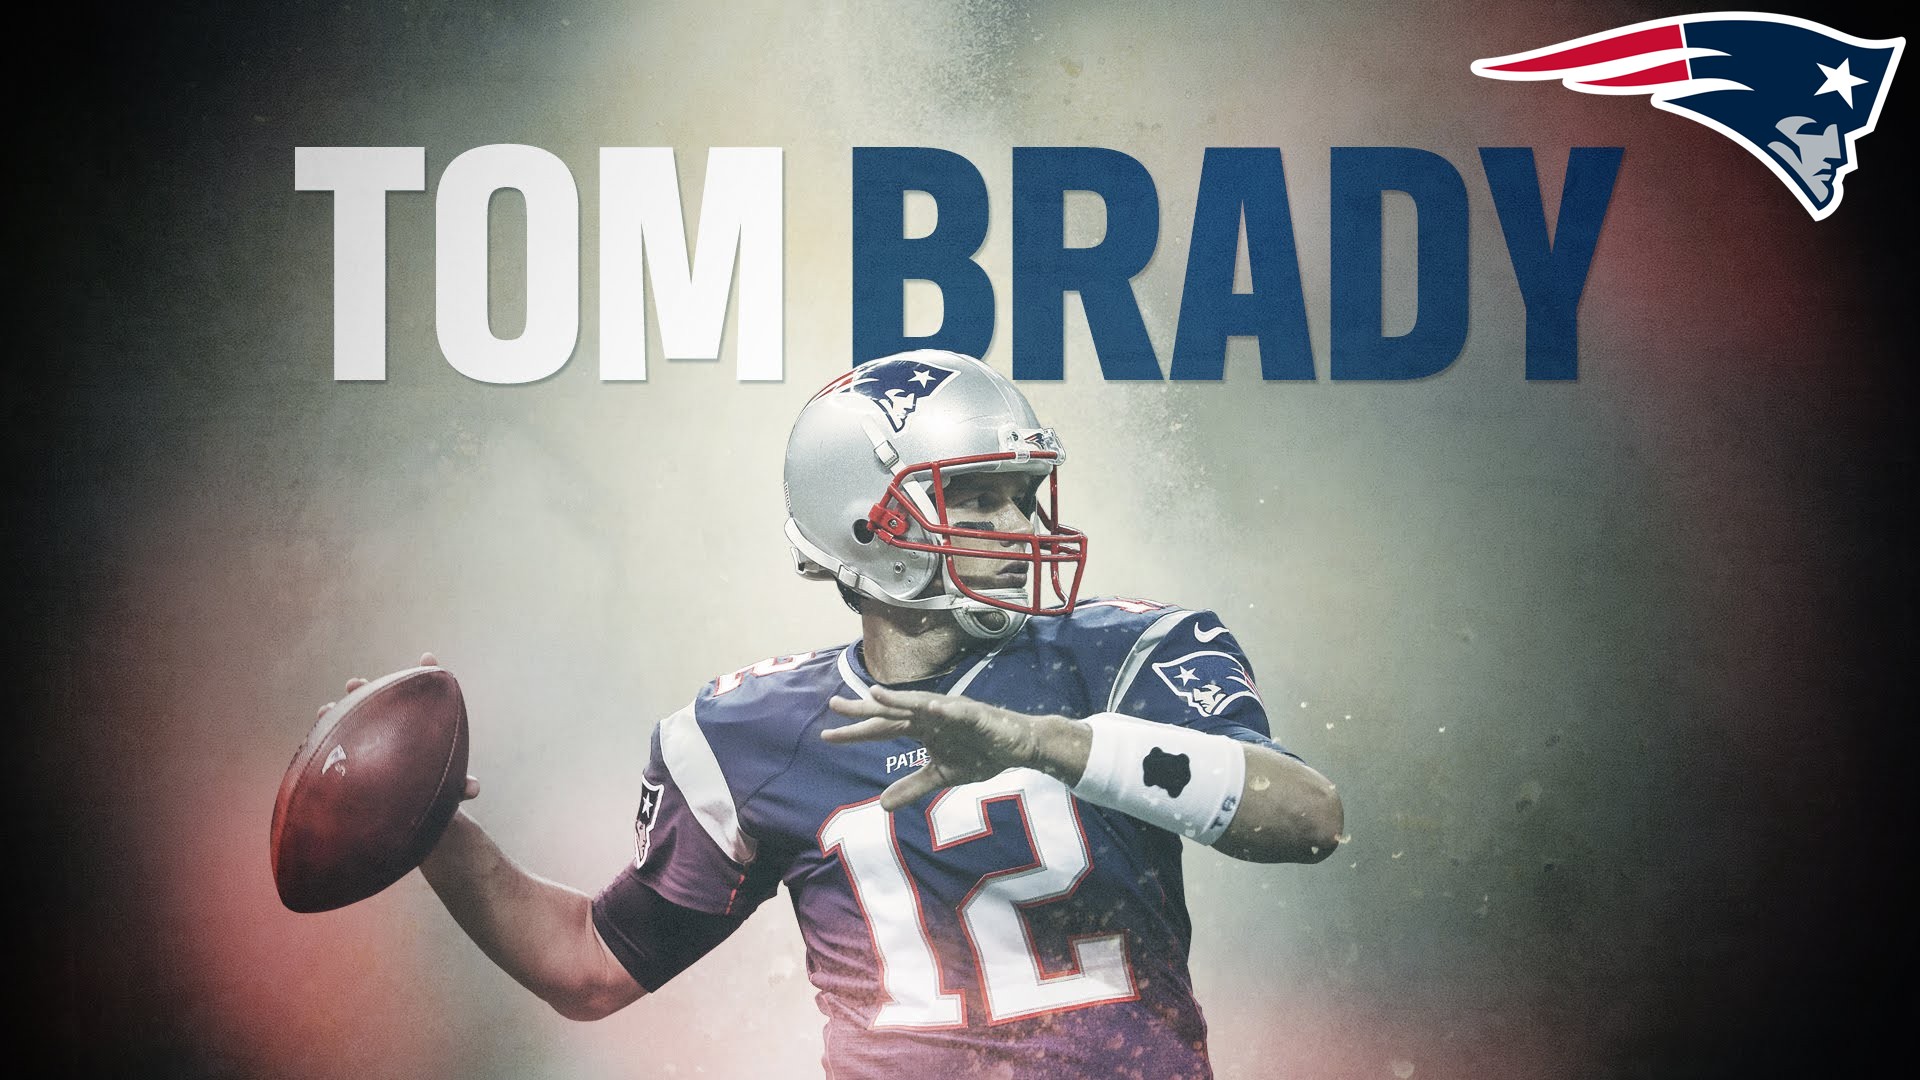 Wallpapers HD Tom Brady With Resolution 1920X1080 pixel. You can make this wallpaper for your Mac or Windows Desktop Background, iPhone, Android or Tablet and another Smartphone device for free